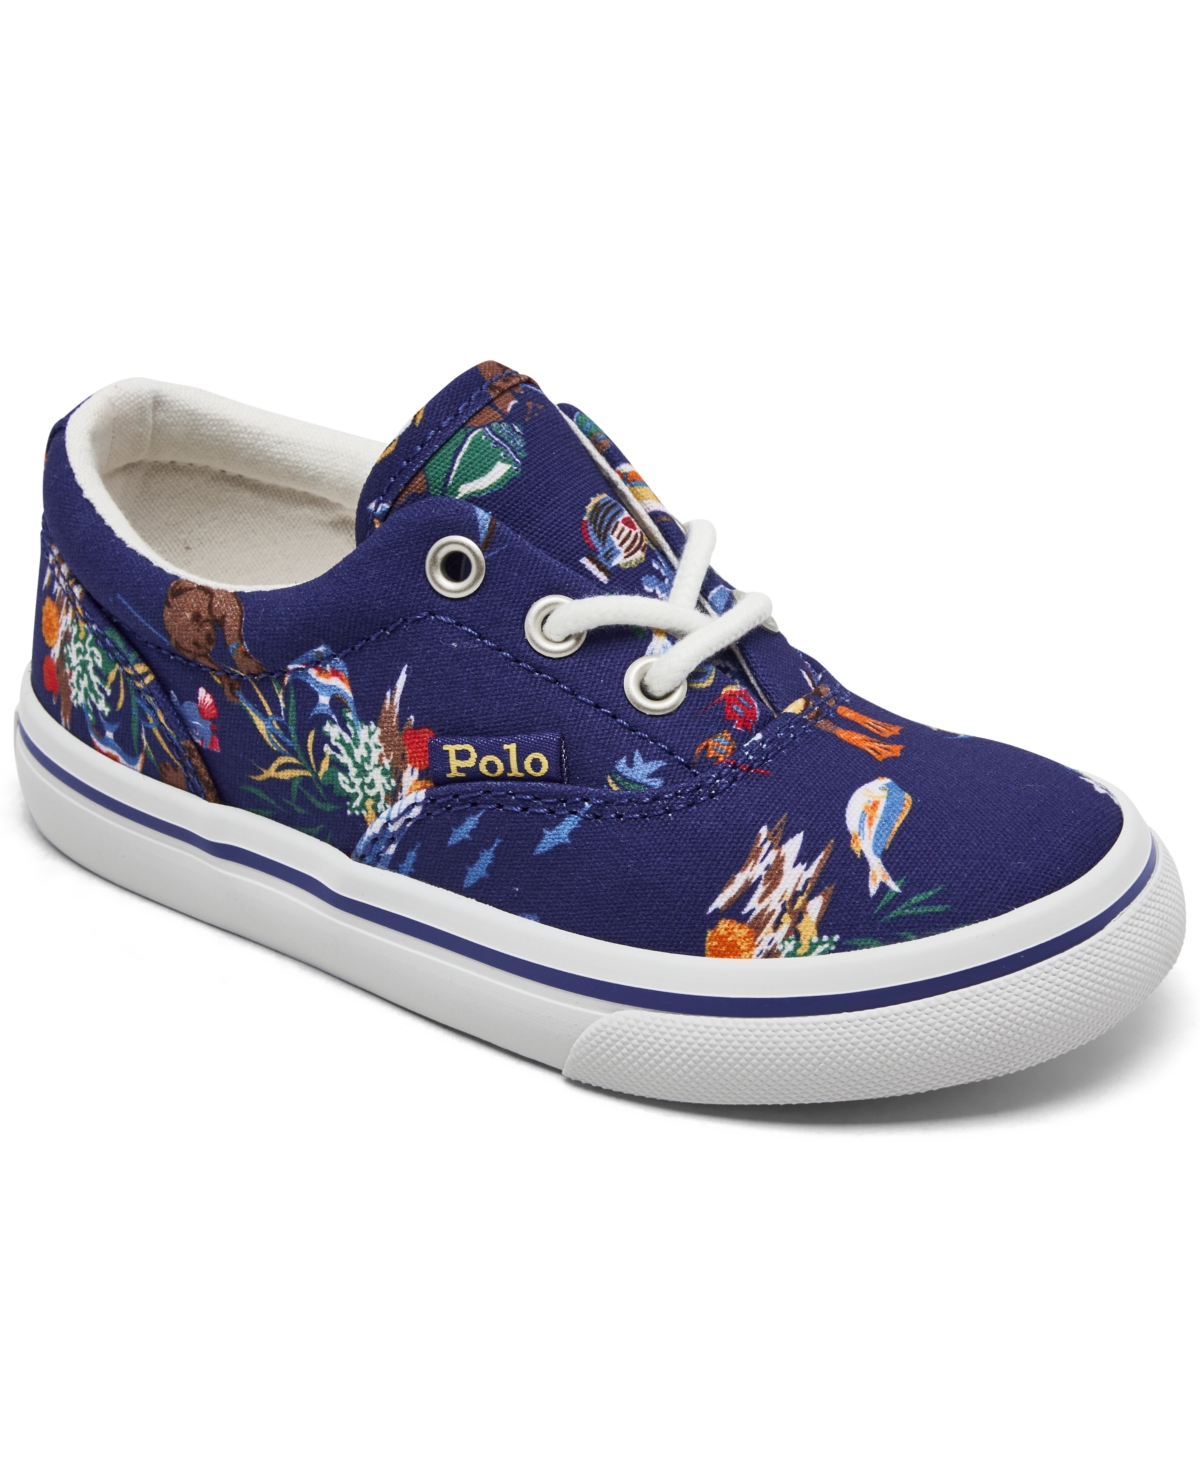 POLO RALPH LAUREN TODDLER BOYS KEATON SLIP-ON CASUAL SNEAKERS FROM FINISH LINE